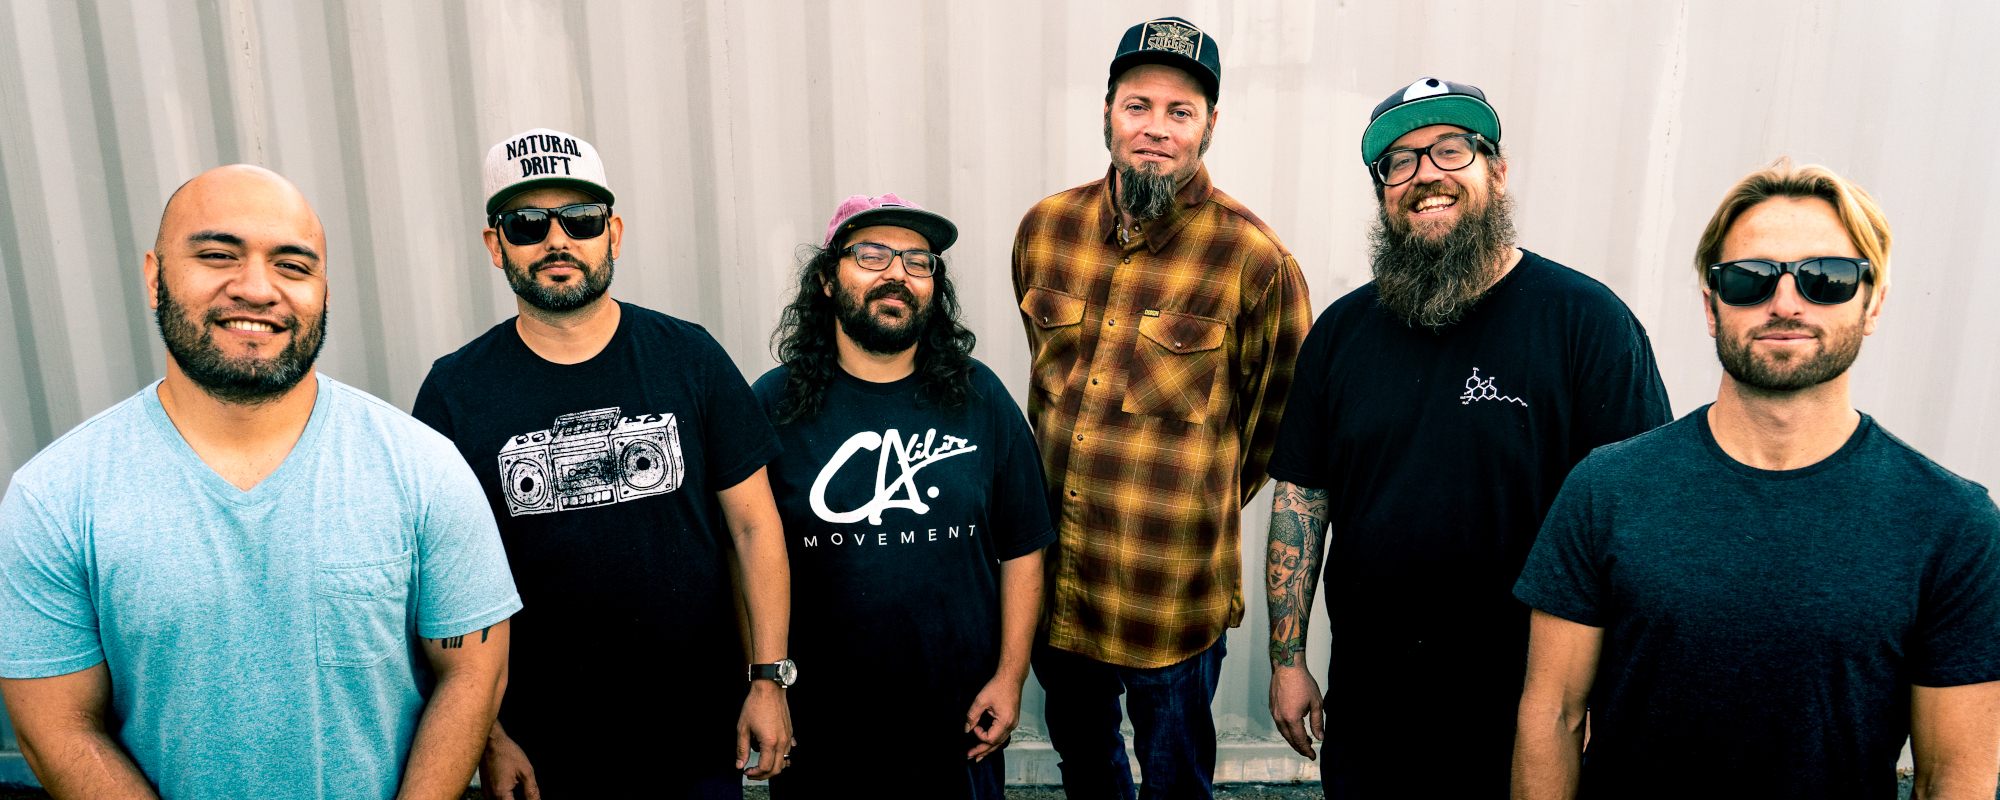 Fortunate Youth is Letting the ‘Good Times (Roll On)’ with New Reggae/Rock Music